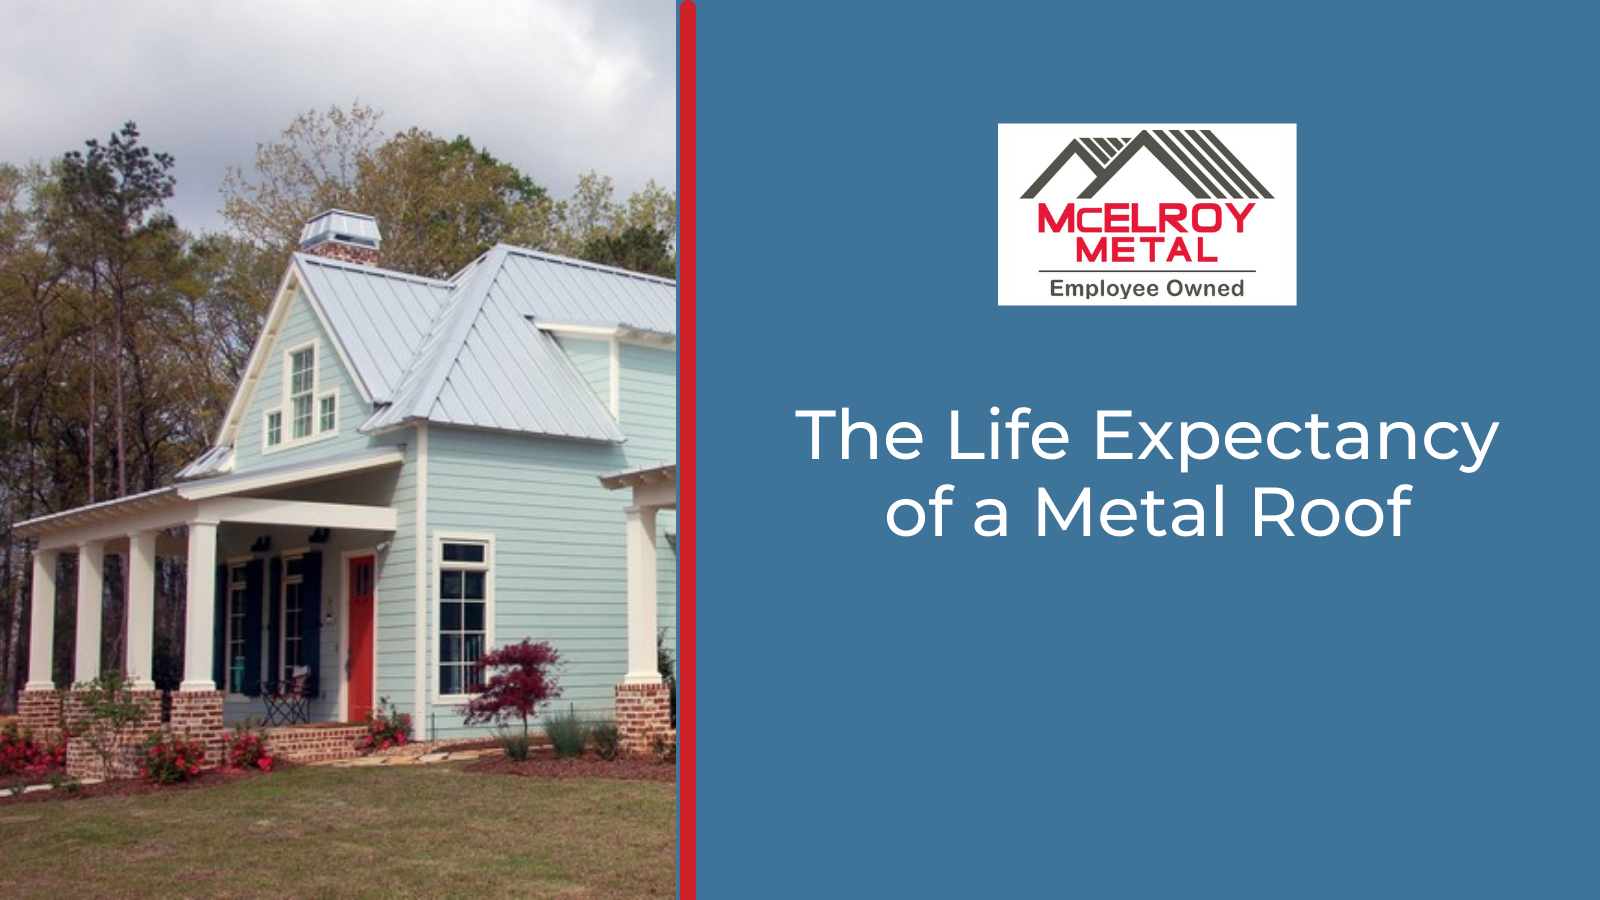 The Life Expectancy of a Metal Roof